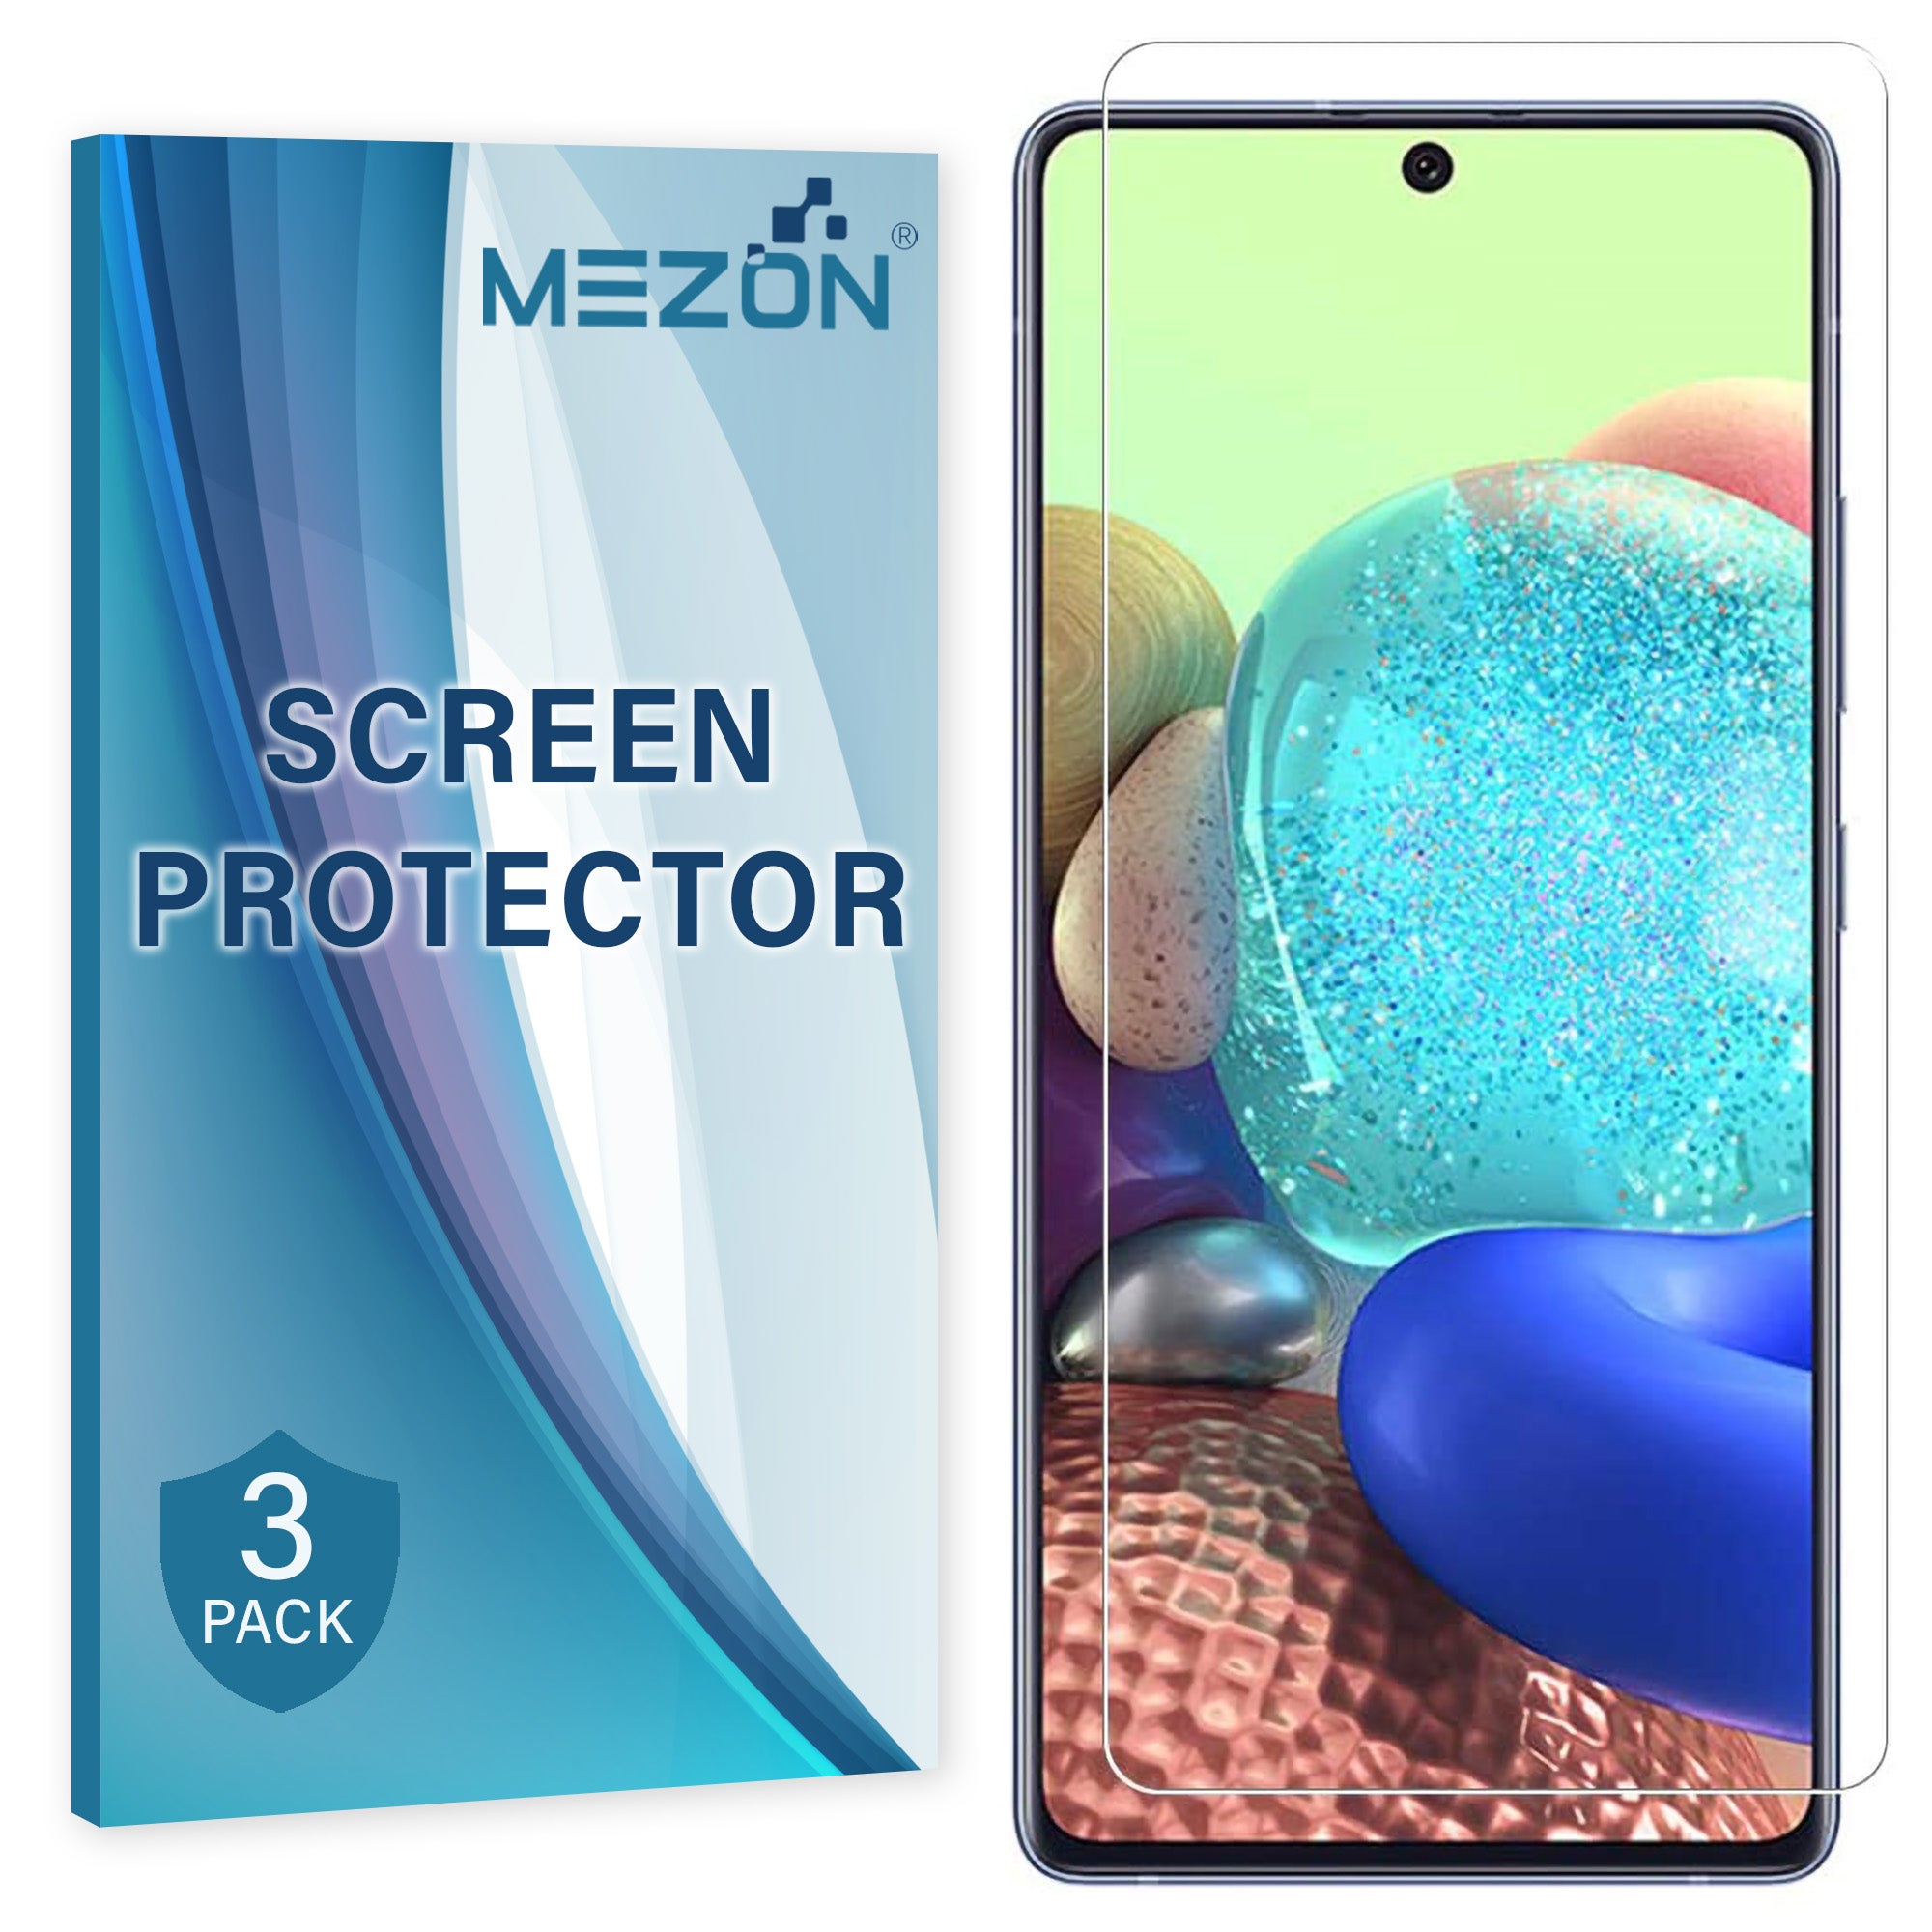 [3 Pack] Samsung Galaxy A71 5G Ultra Clear Screen Protector Film by MEZON – Case Friendly, Shock Absorption (A71 5G, Clear)